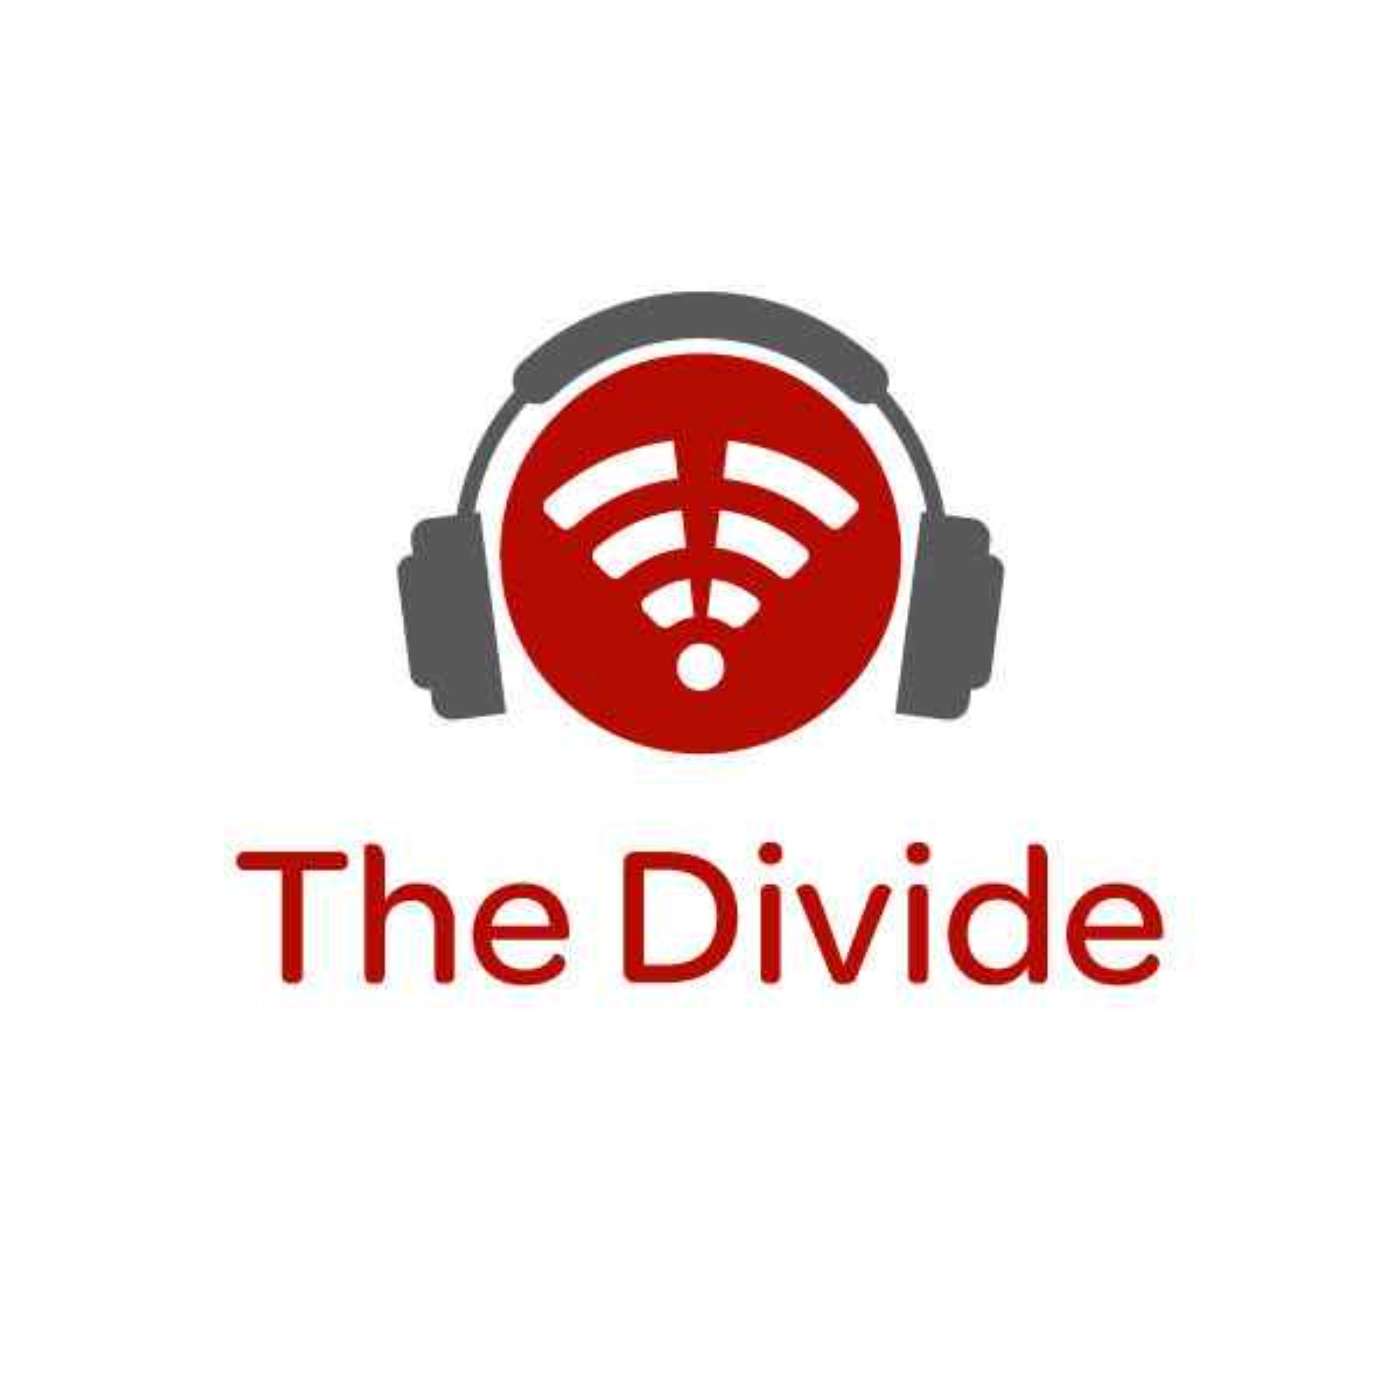 The Divide: Free Press' Josh Stager on the FCC's move to restore Title II oversight